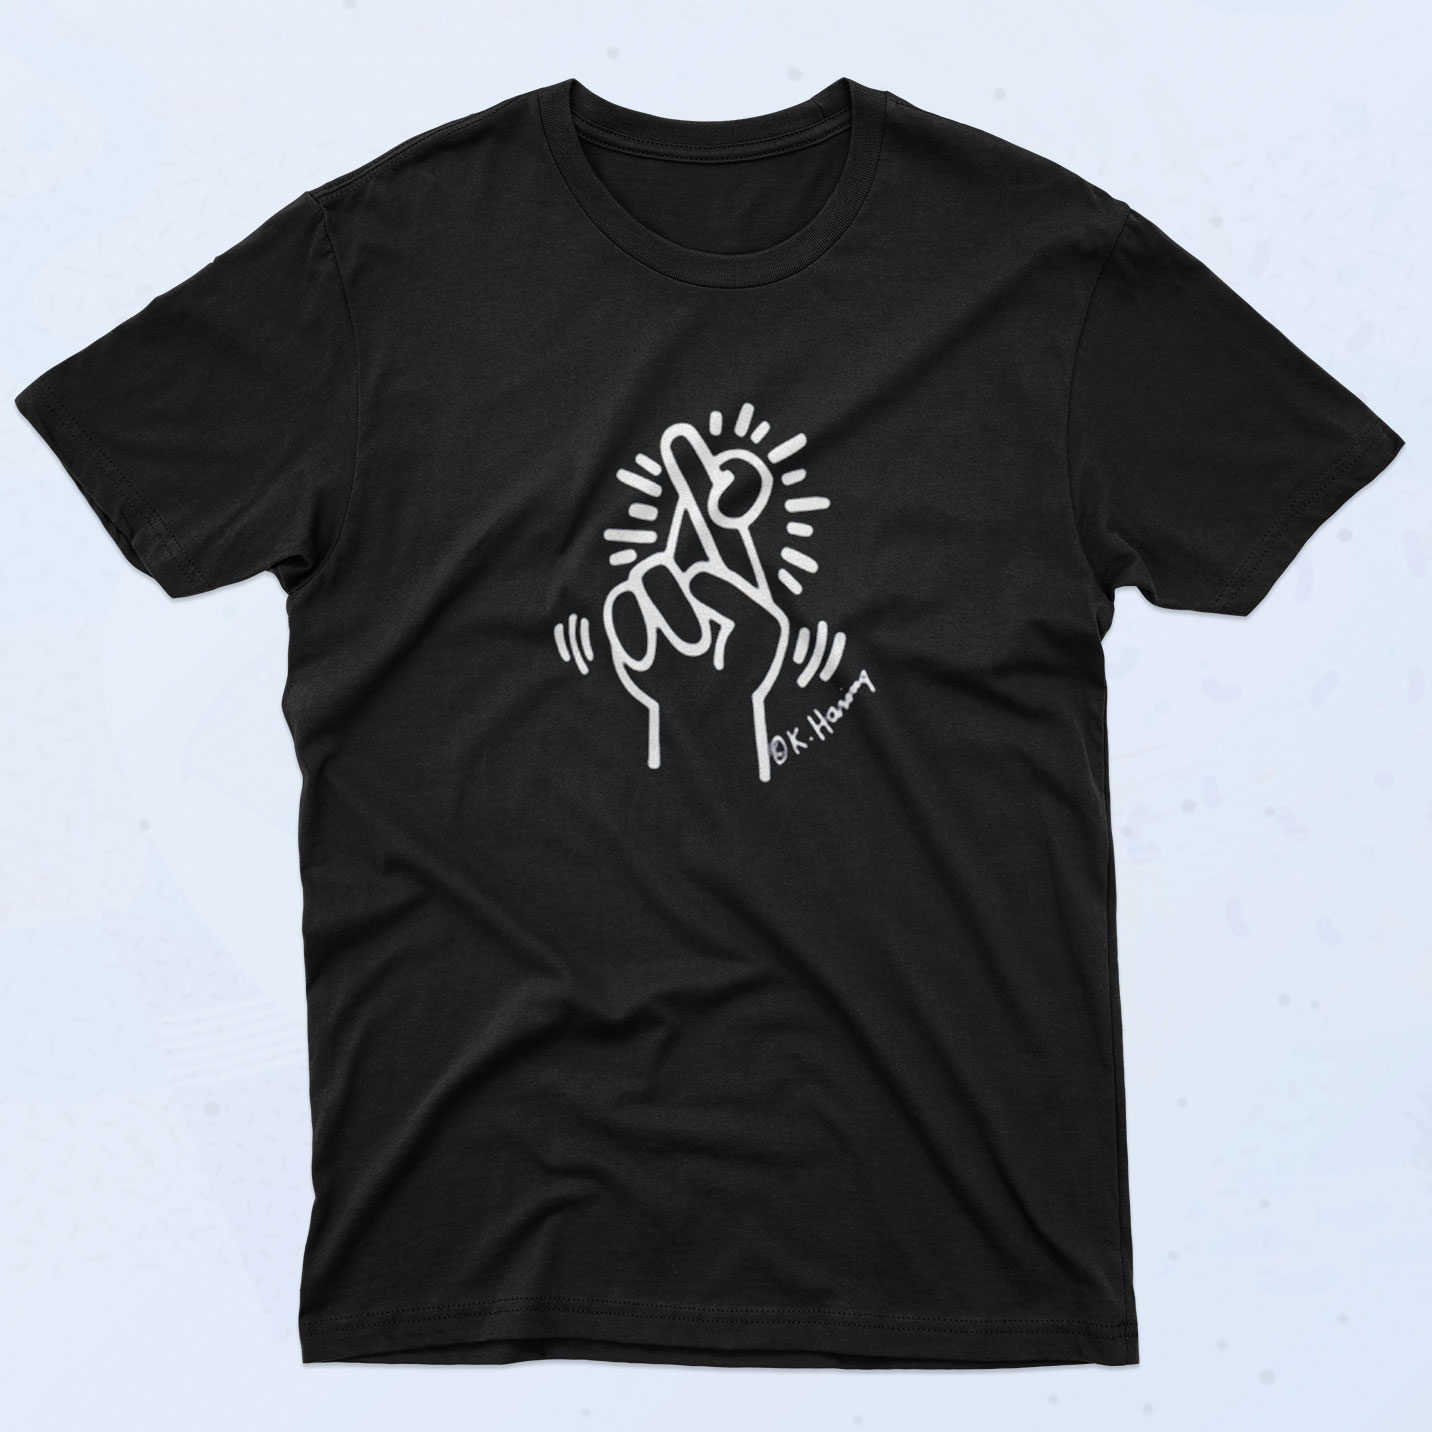 Vintage Keith Haring Crossed Finger 90s T Shirt Style - 90sclothes.com